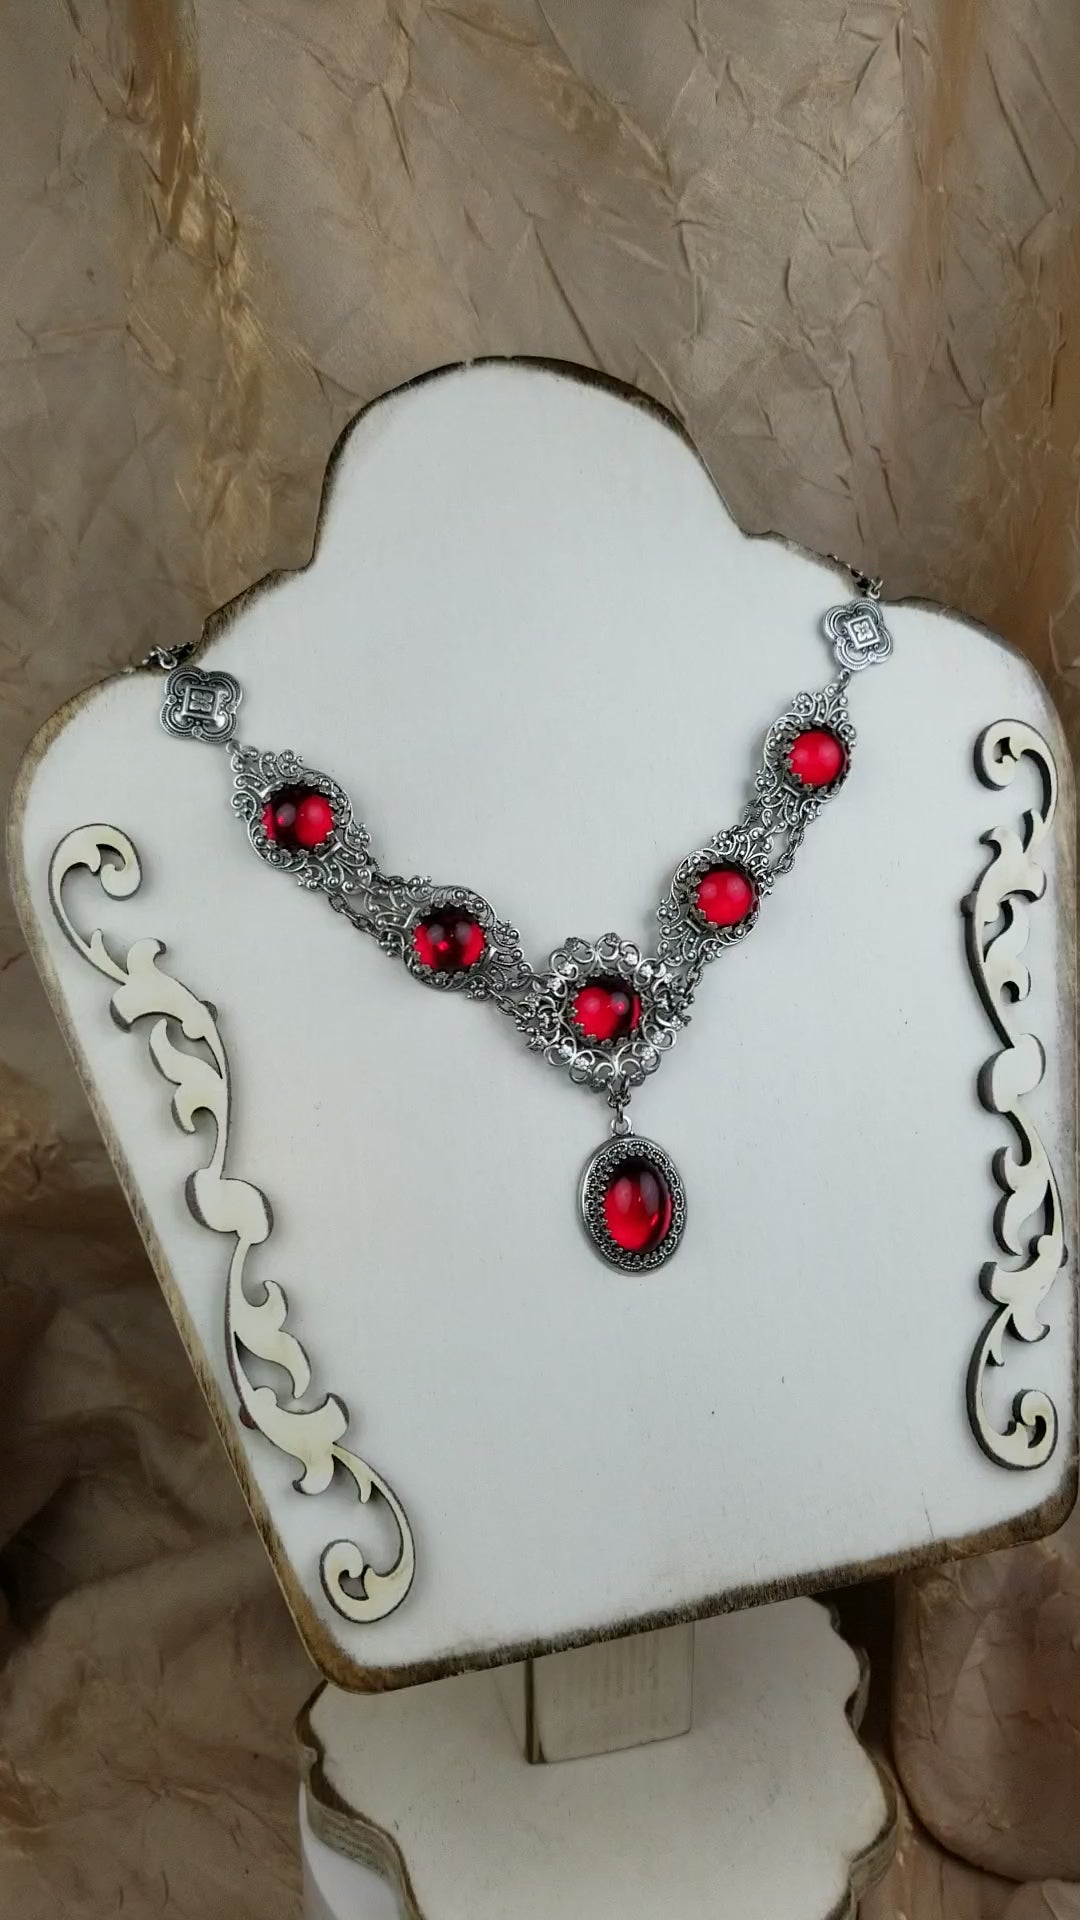 Video: Lucia Necklace in Garnet and Antiqued Silver by Rabbitwood and Reason